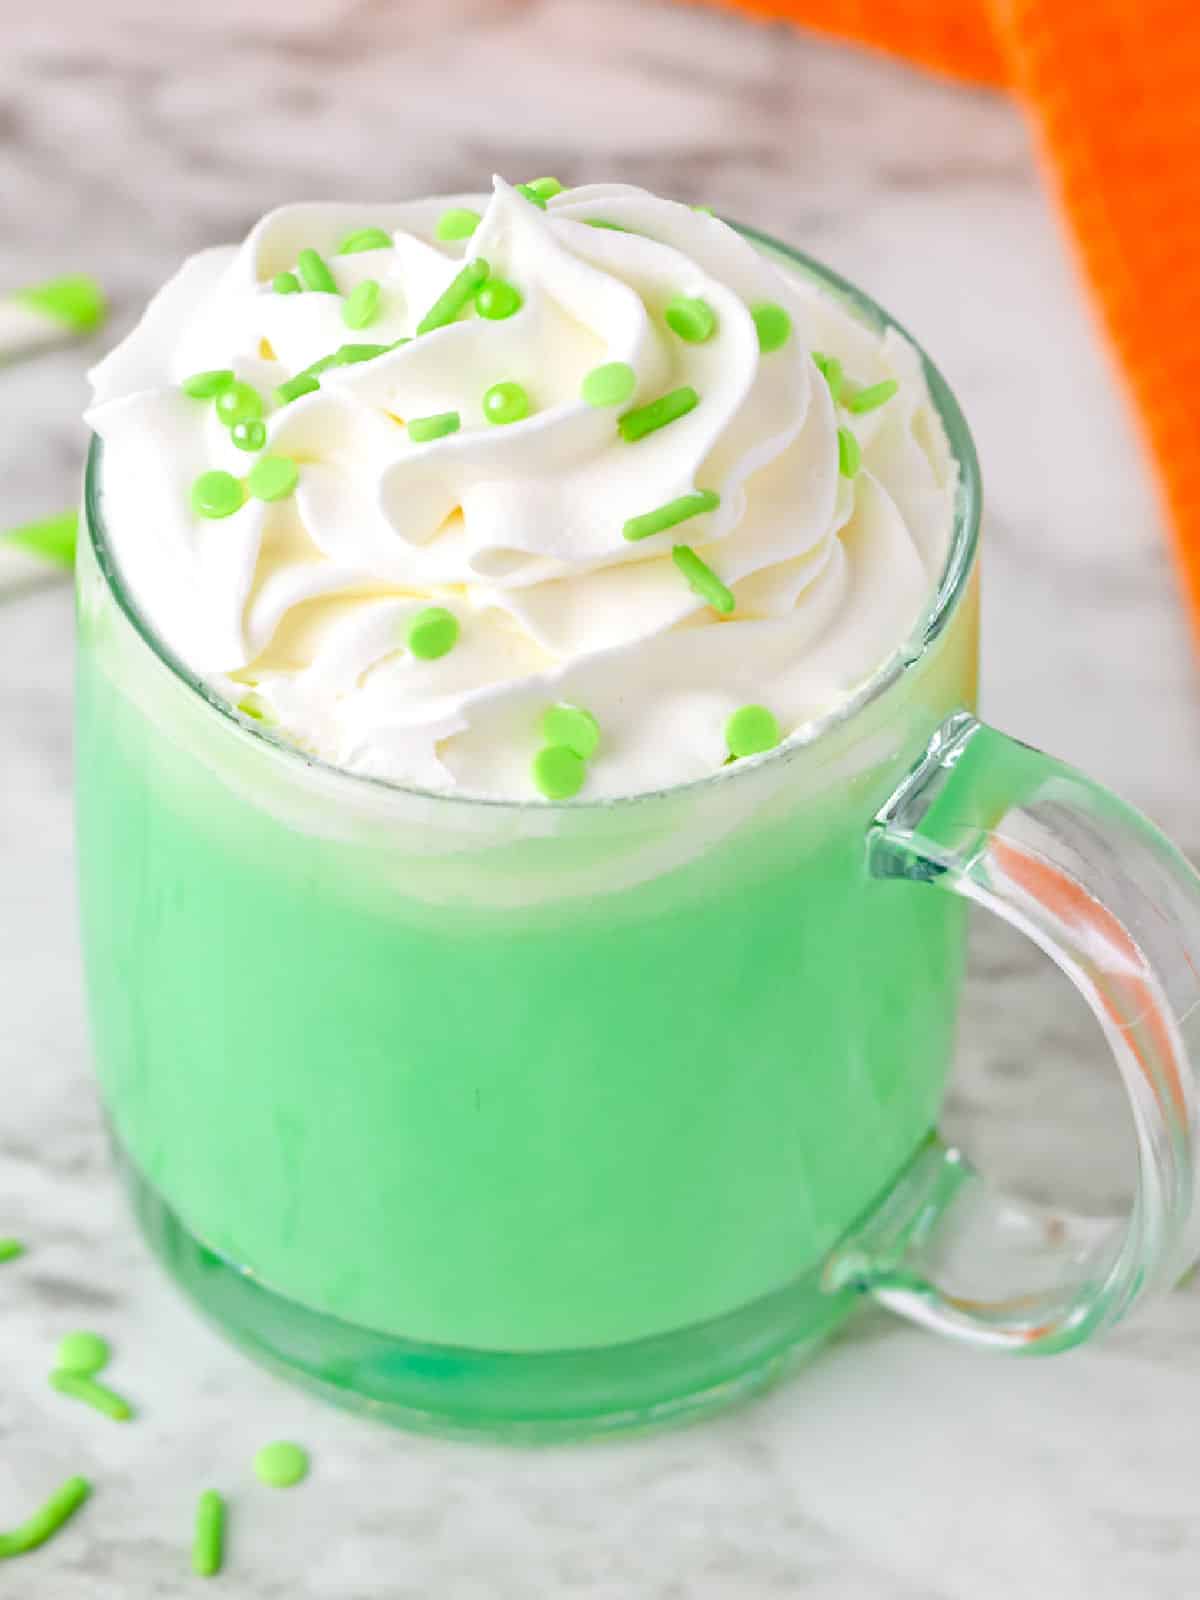 A green hot chocolate with whipped cream and sprinkles.